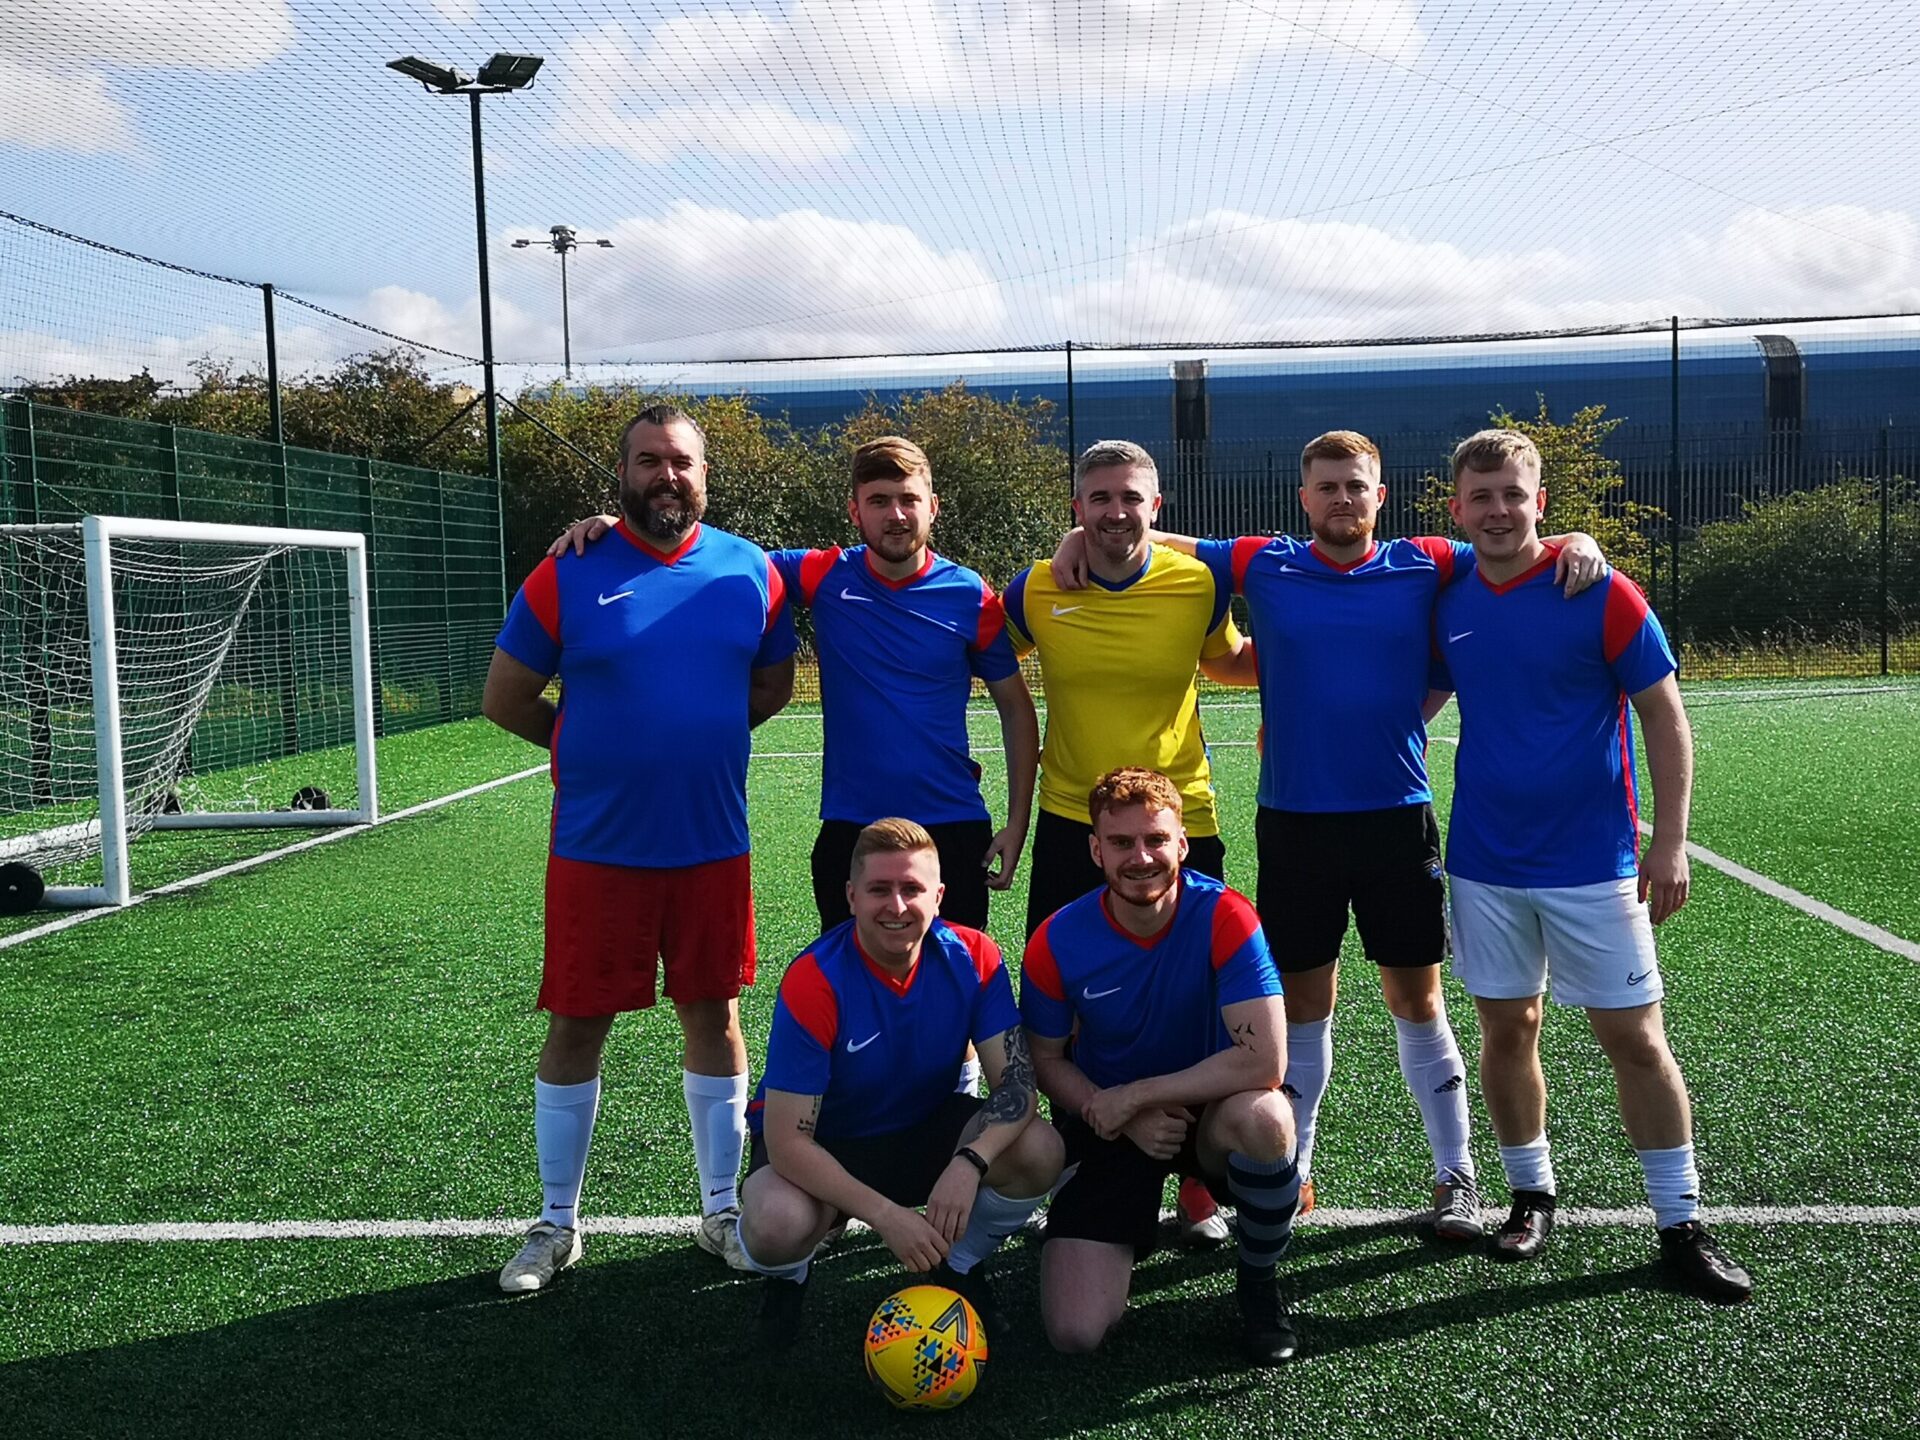 GHM raises £5,000 for Helen & Douglas House with charity football tournament